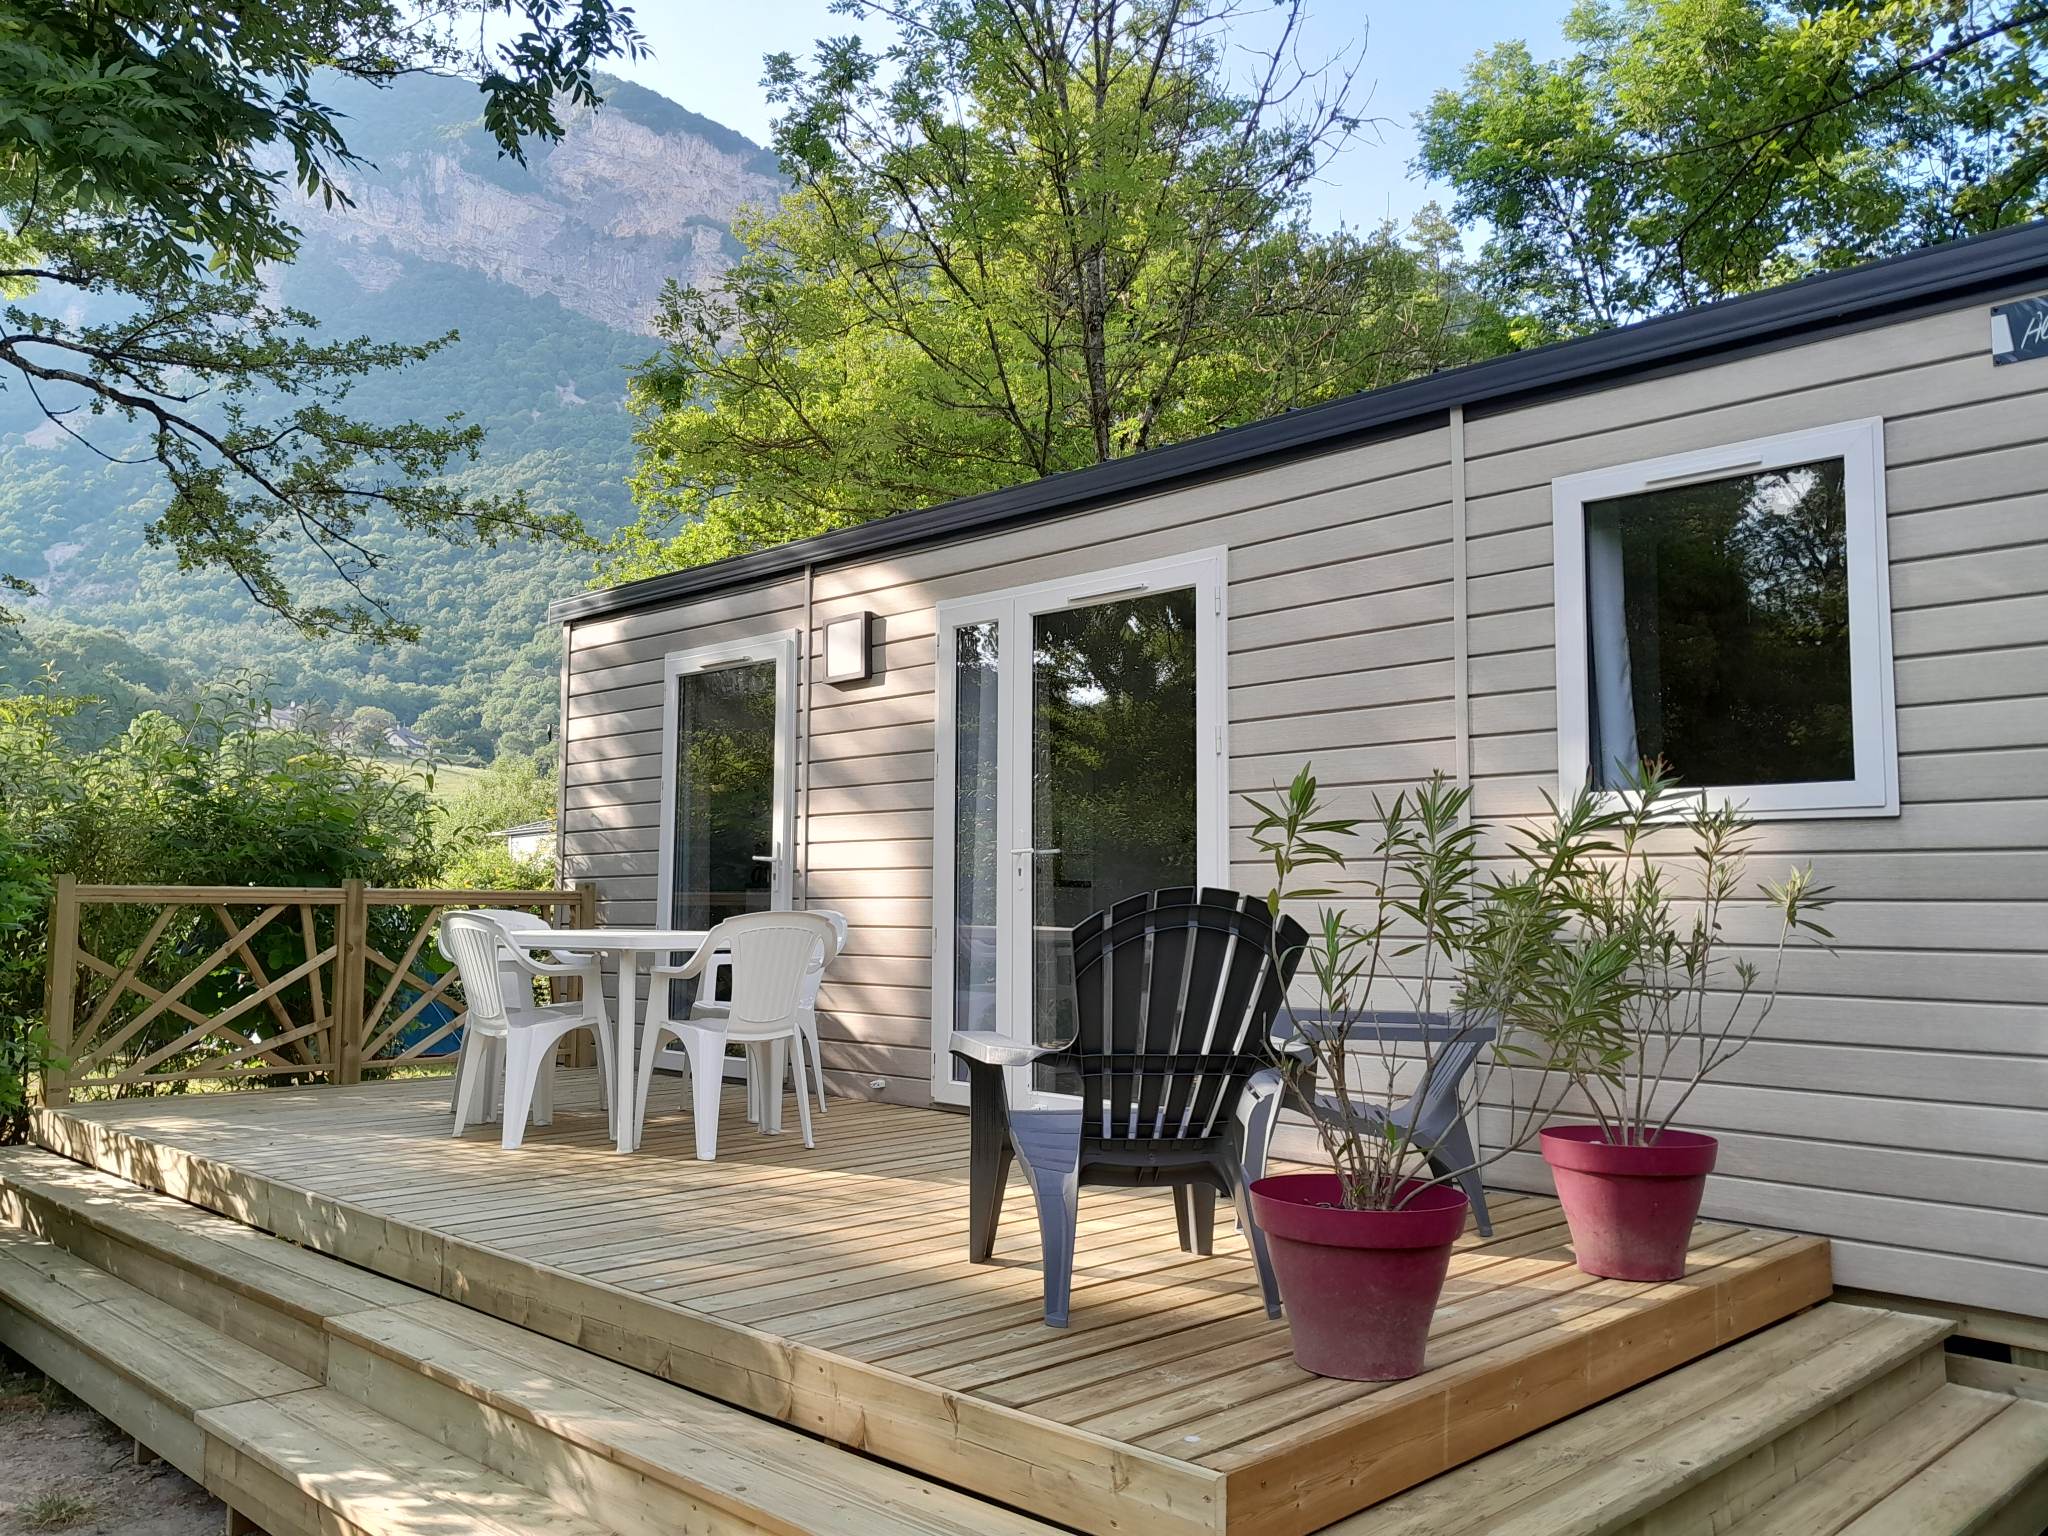 Location - Mobil-Home Premium 2 Chambres - Camping Le Colombier, Culoz